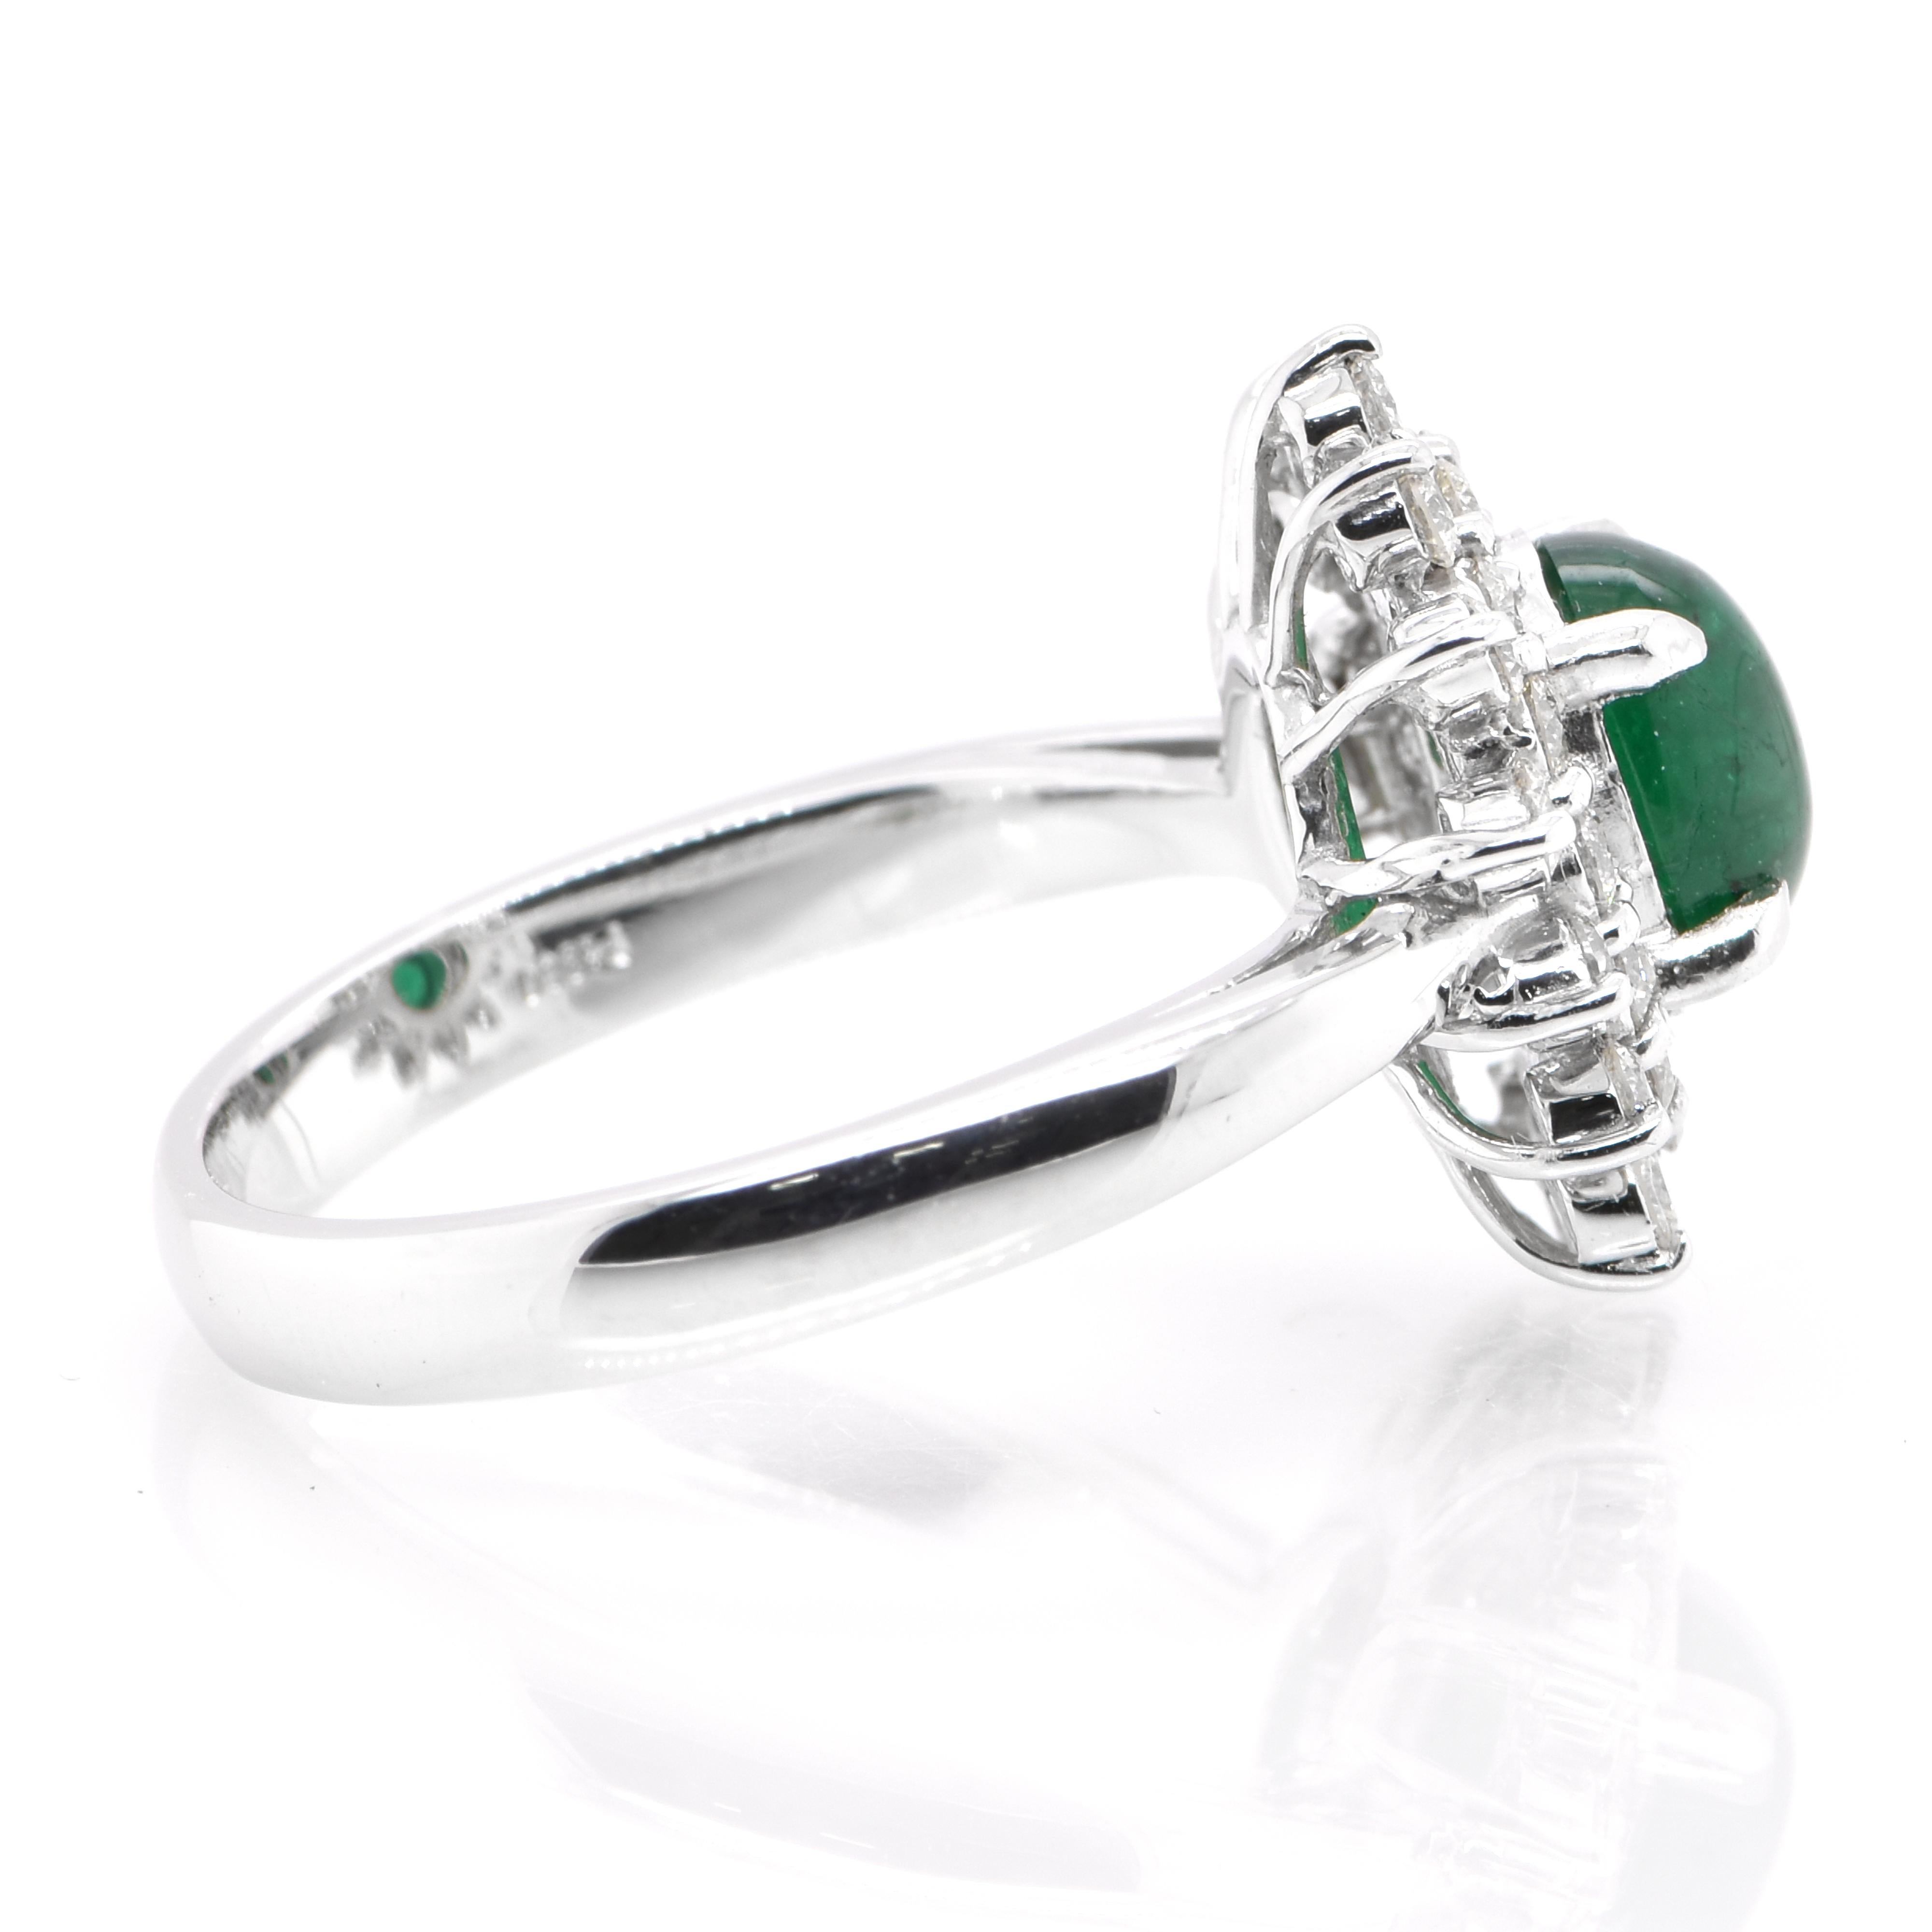 Women's 1.17 Carat Natural Emerald Cabochon and Diamond Ring Set in Platinum For Sale